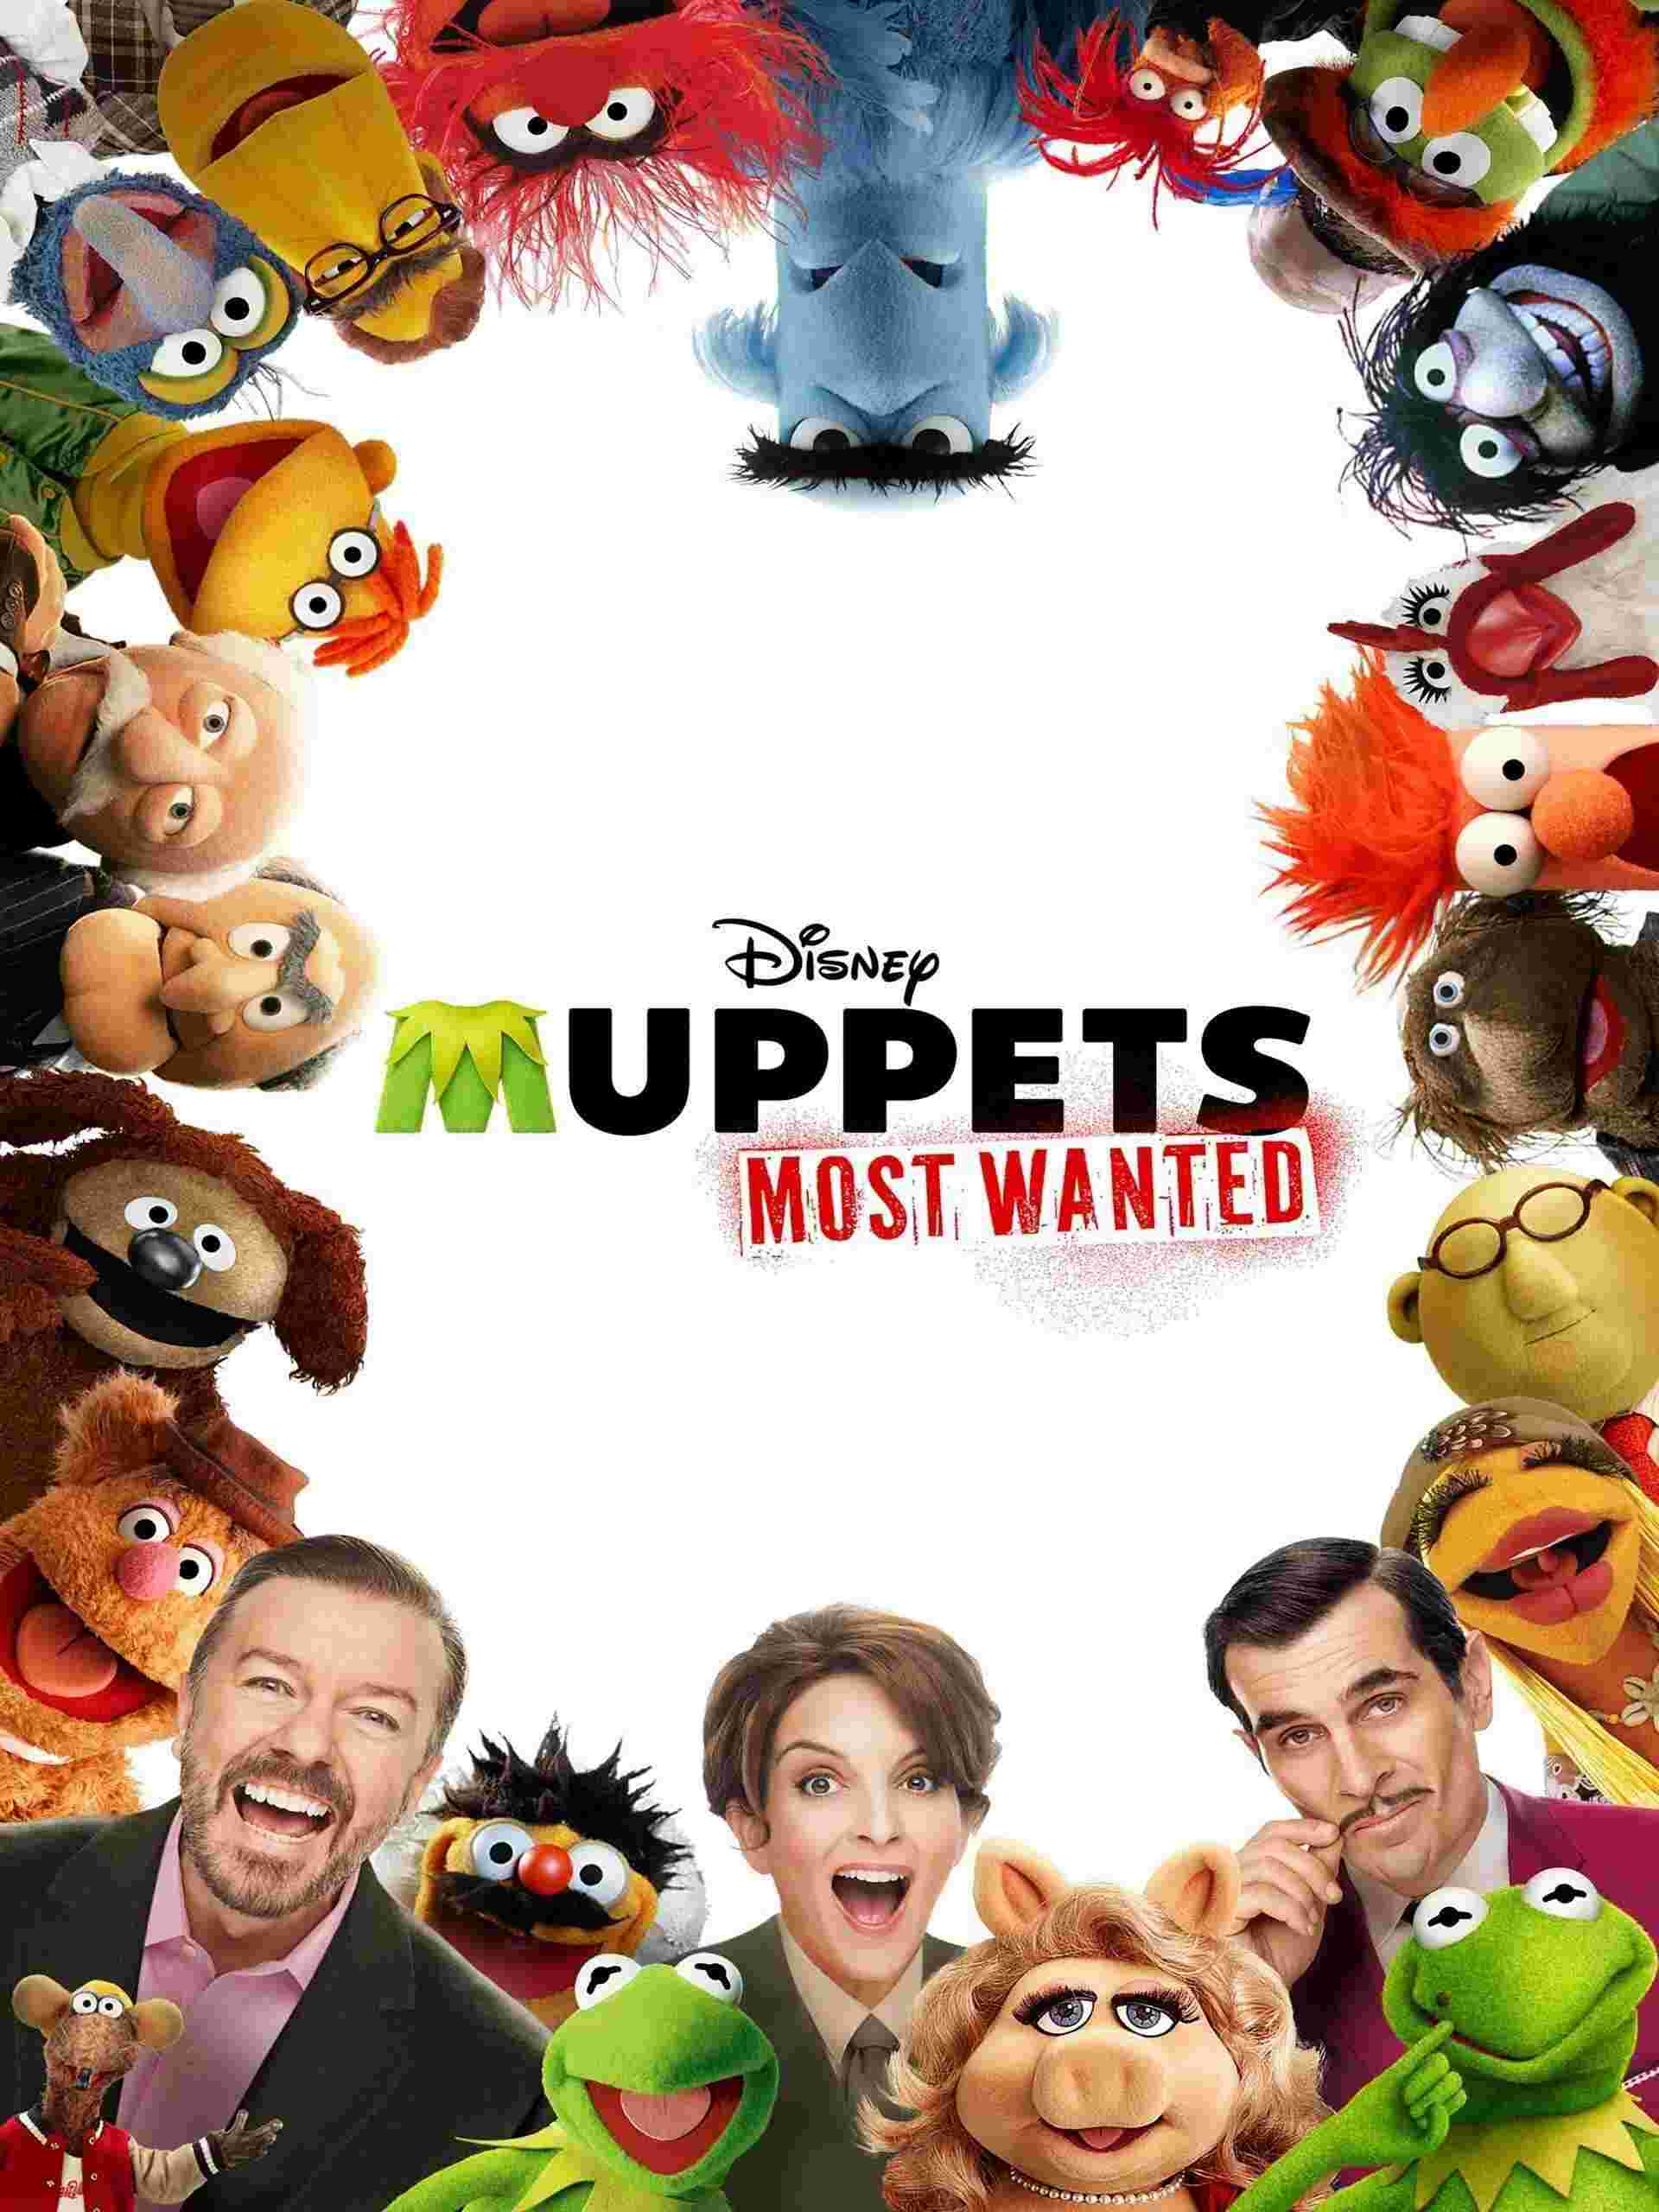 Muppets Most Wanted (2014) Ricky Gervais